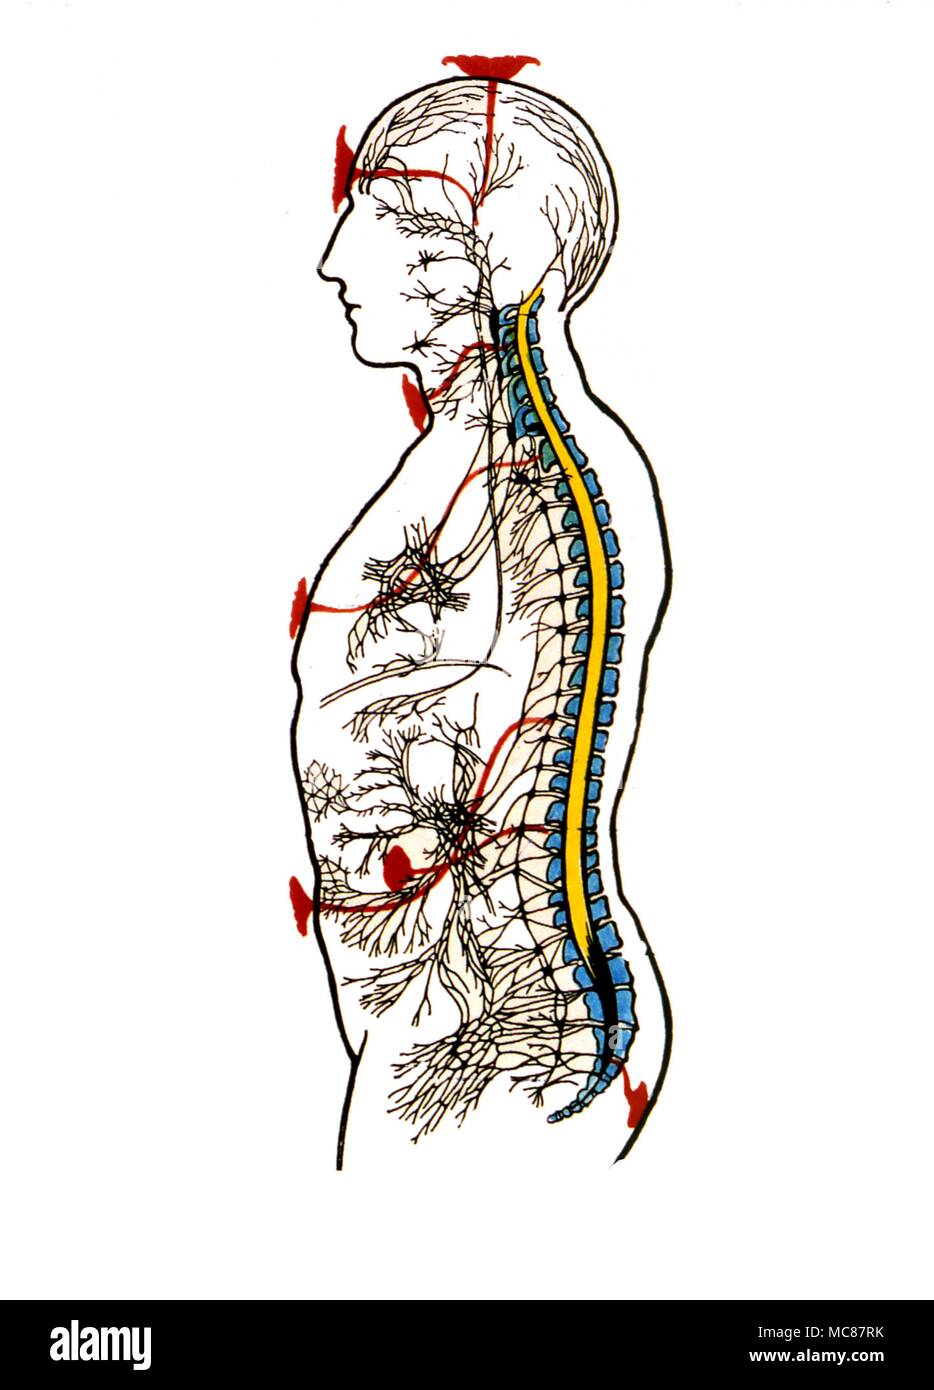 Chakras Late 19th century diagram derived from Theosophical Sources after the work of Leadbeater describing the relation between the seven chakras and the spinal cord Stock Photo